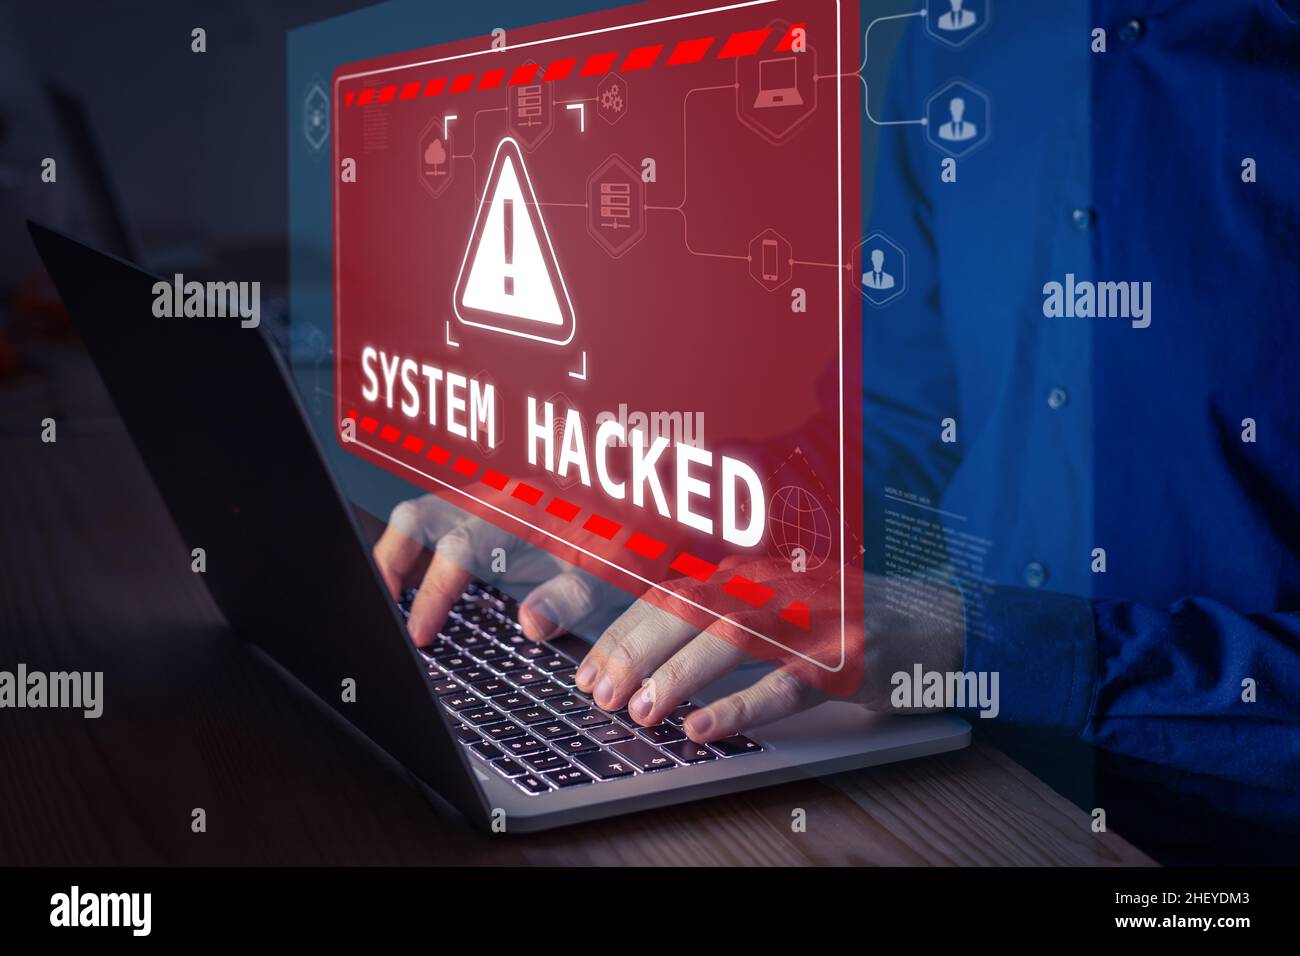 System hacked alert after cyber attack on computer network. Cybersecurity vulnerability, data breach, illegal connection, compromised information conc Stock Photo